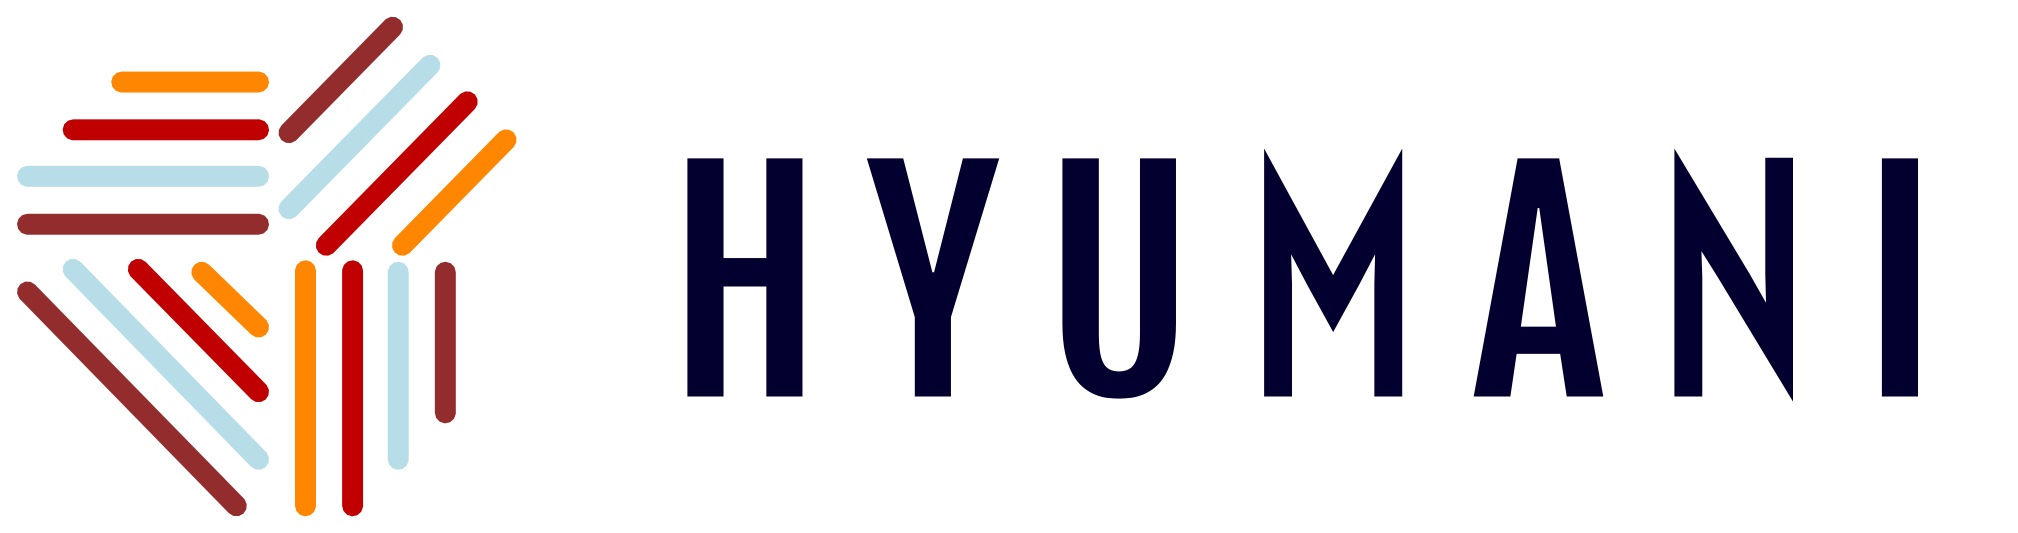 HYUMANI - personality AI for sustainable living